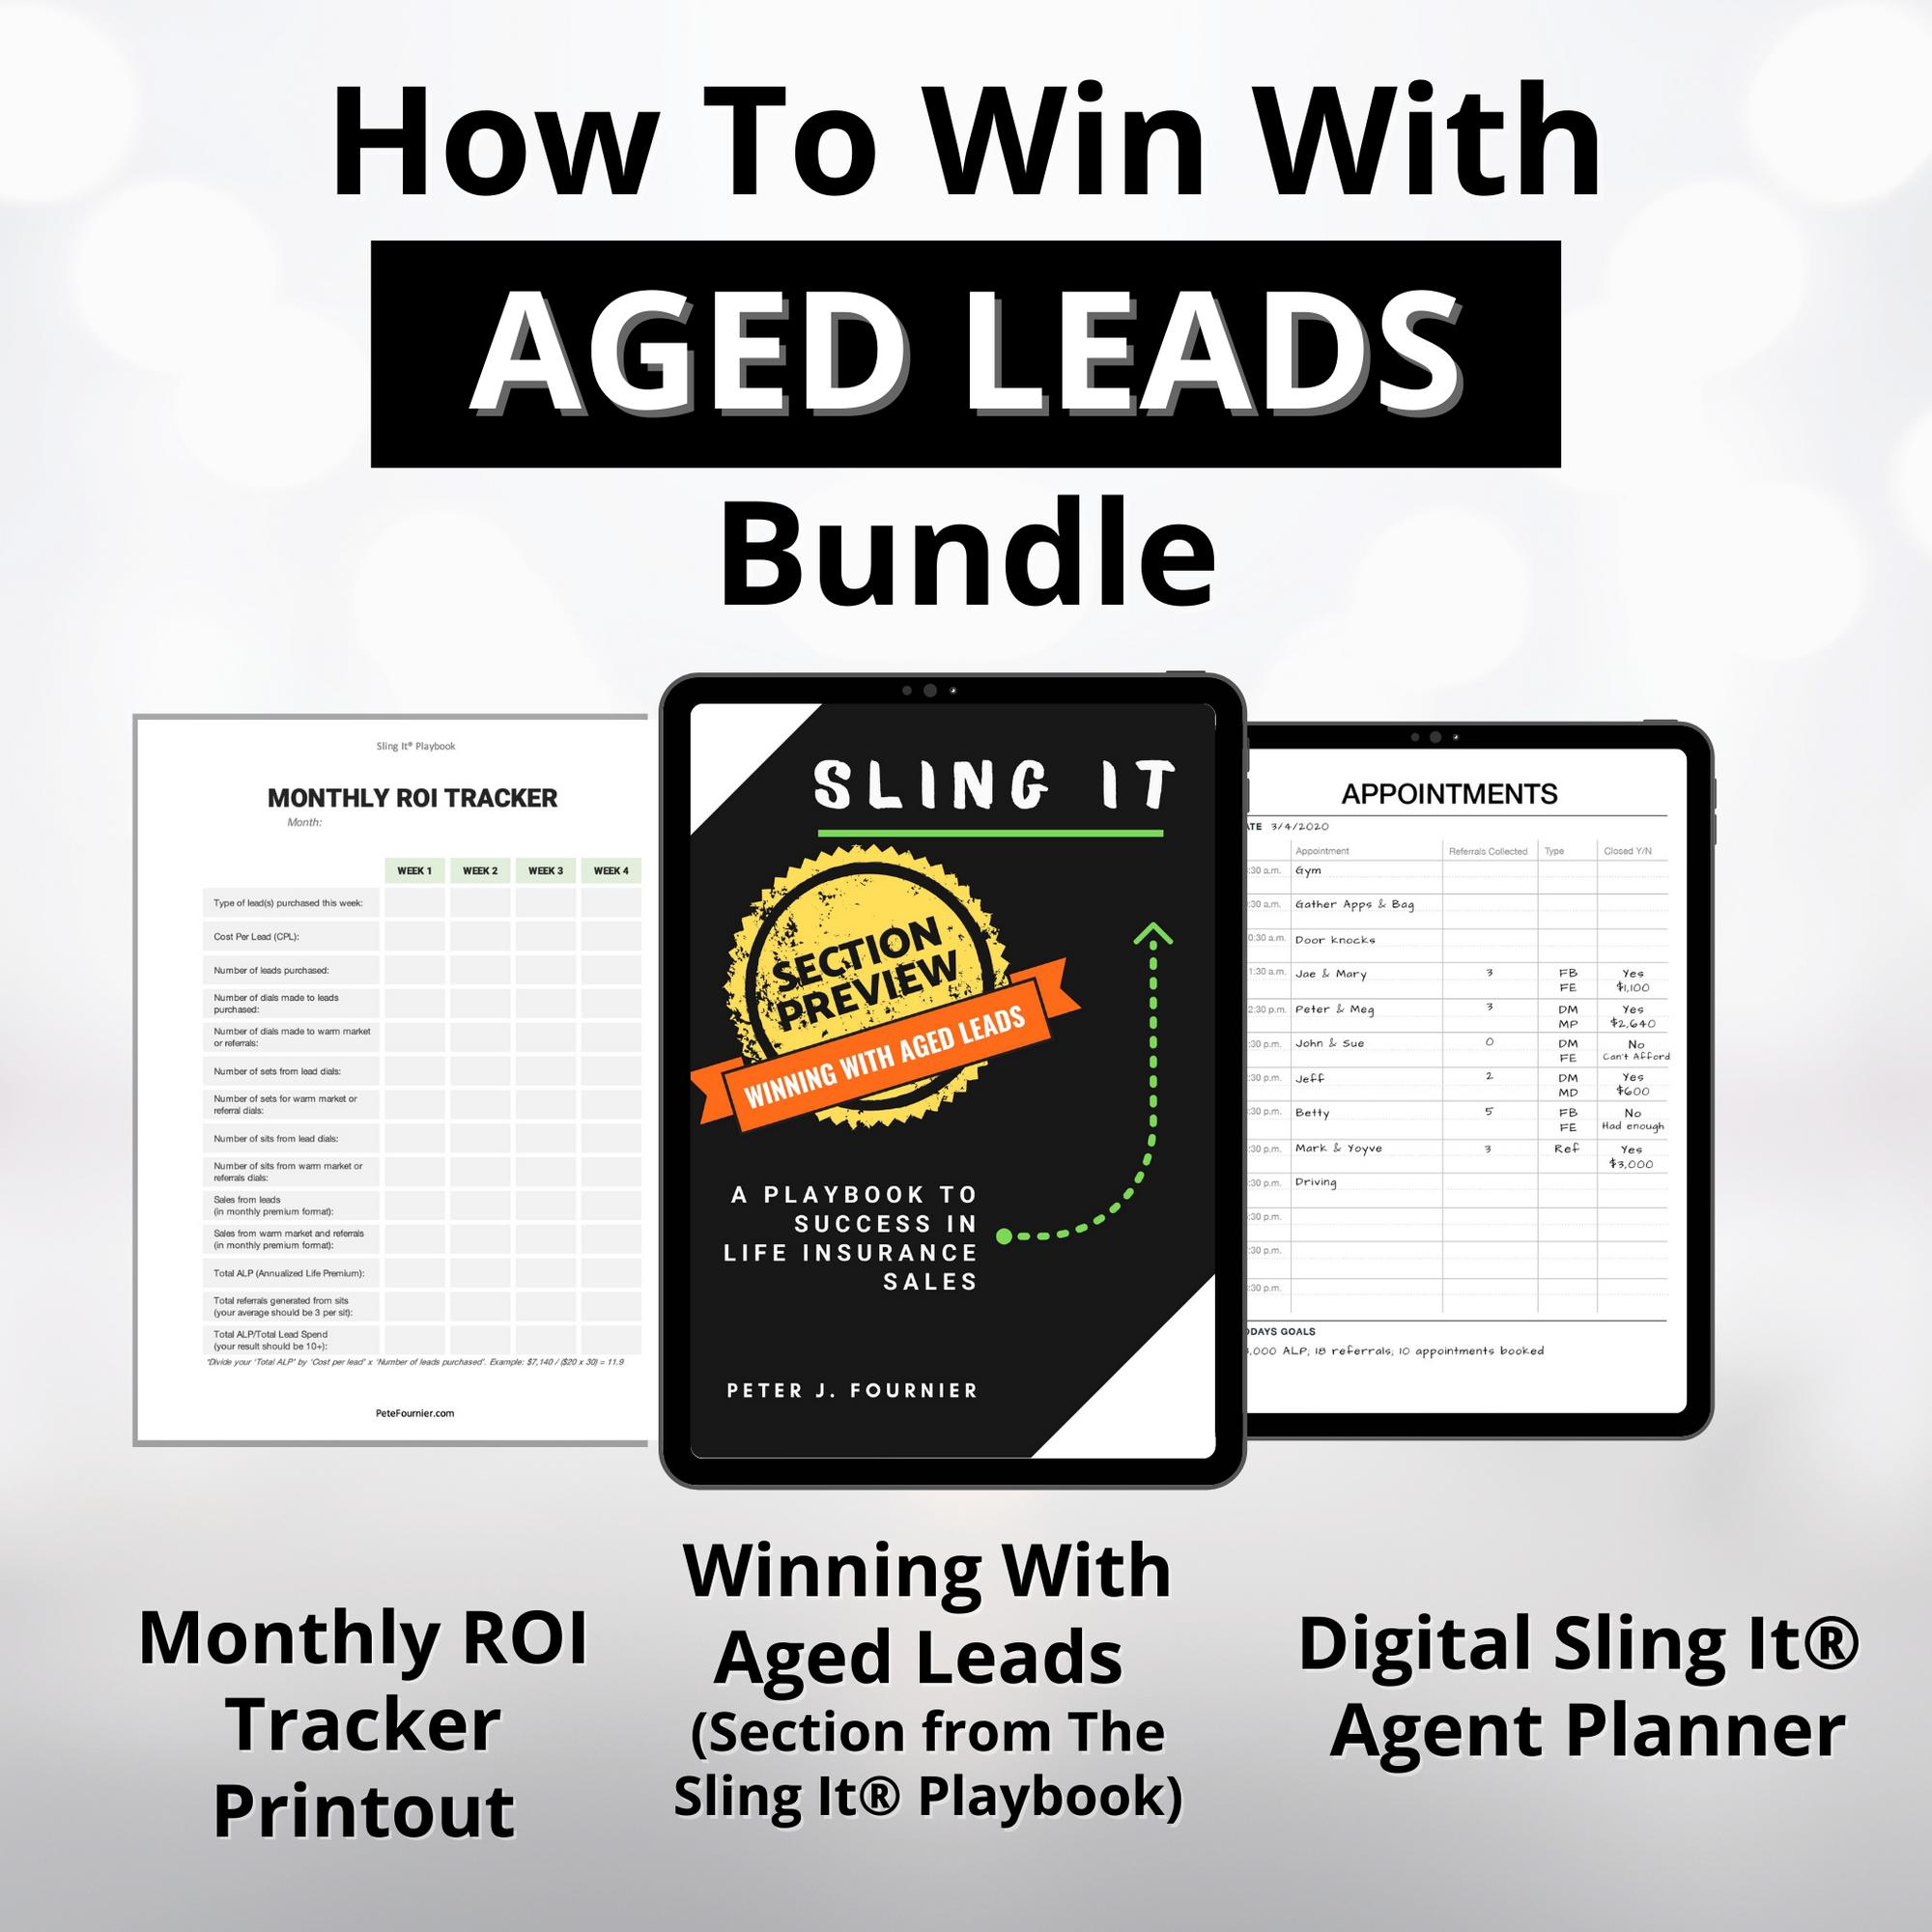 How To Win With Aged Leads Bundle